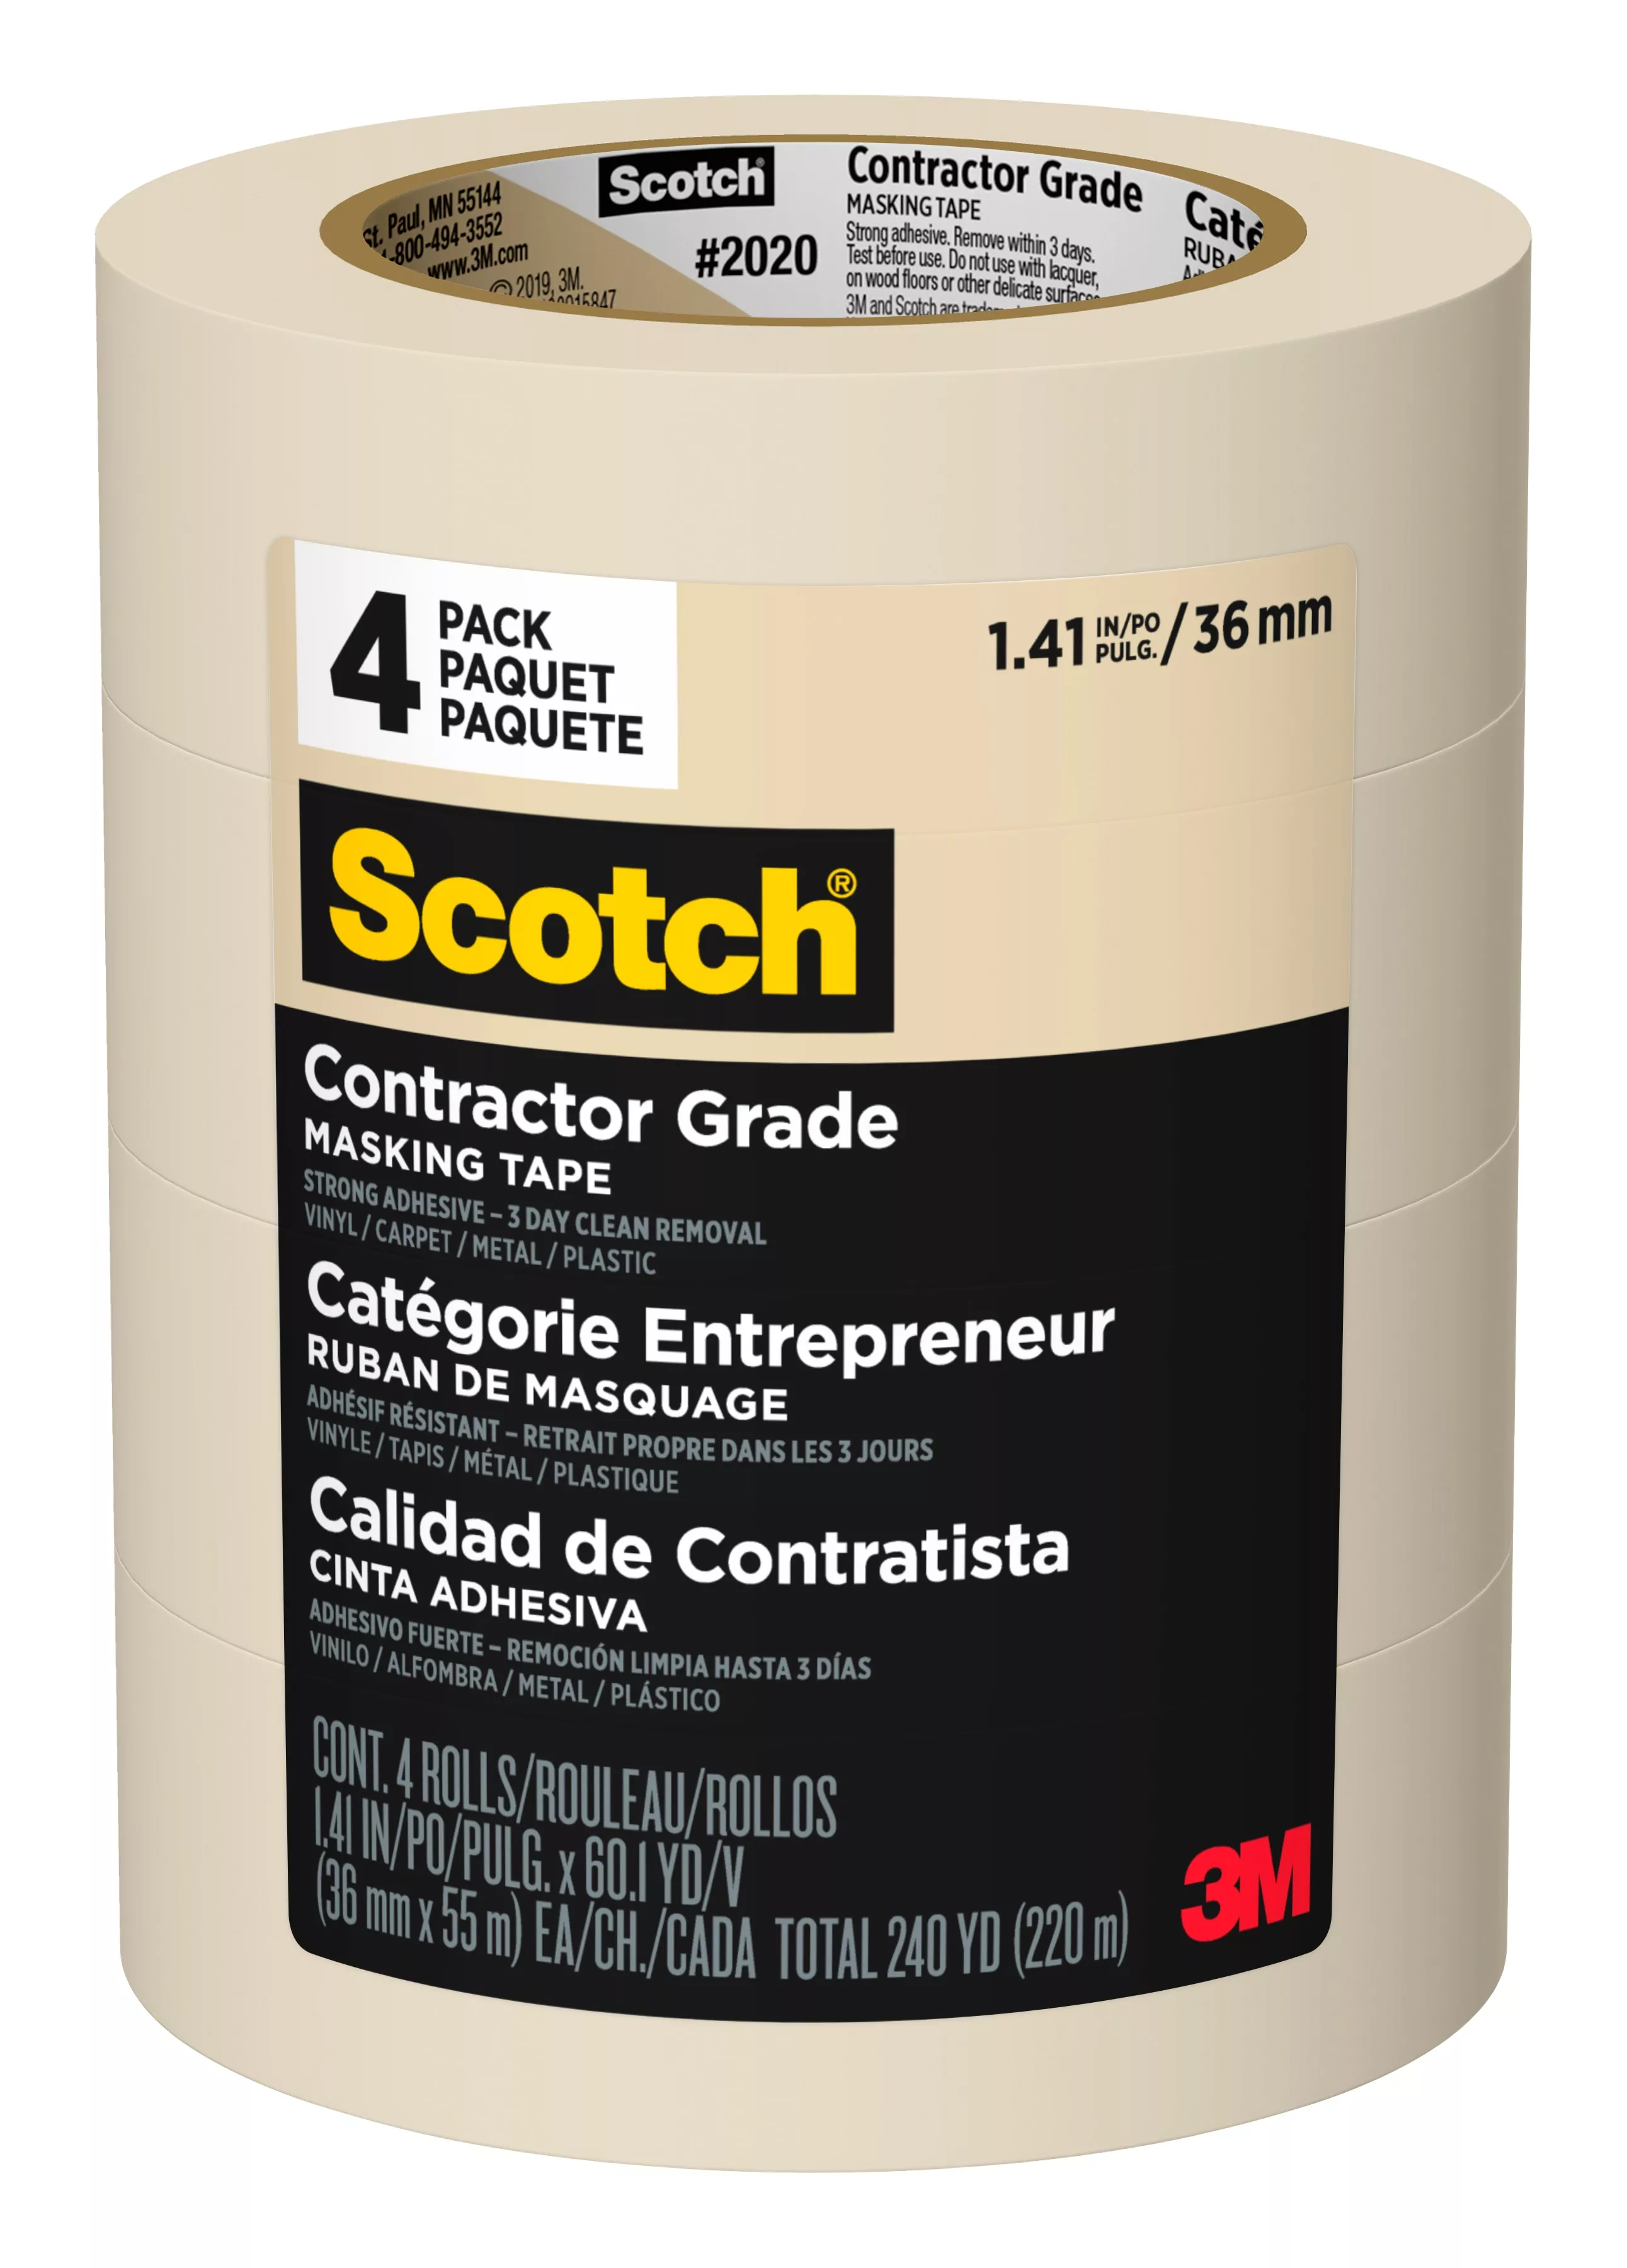 Scotch®Contractor Grade Masking Tape 2020-36EP4, 1.41 in x 60.1 yd (36mm
x 55m), 4 rolls/pack